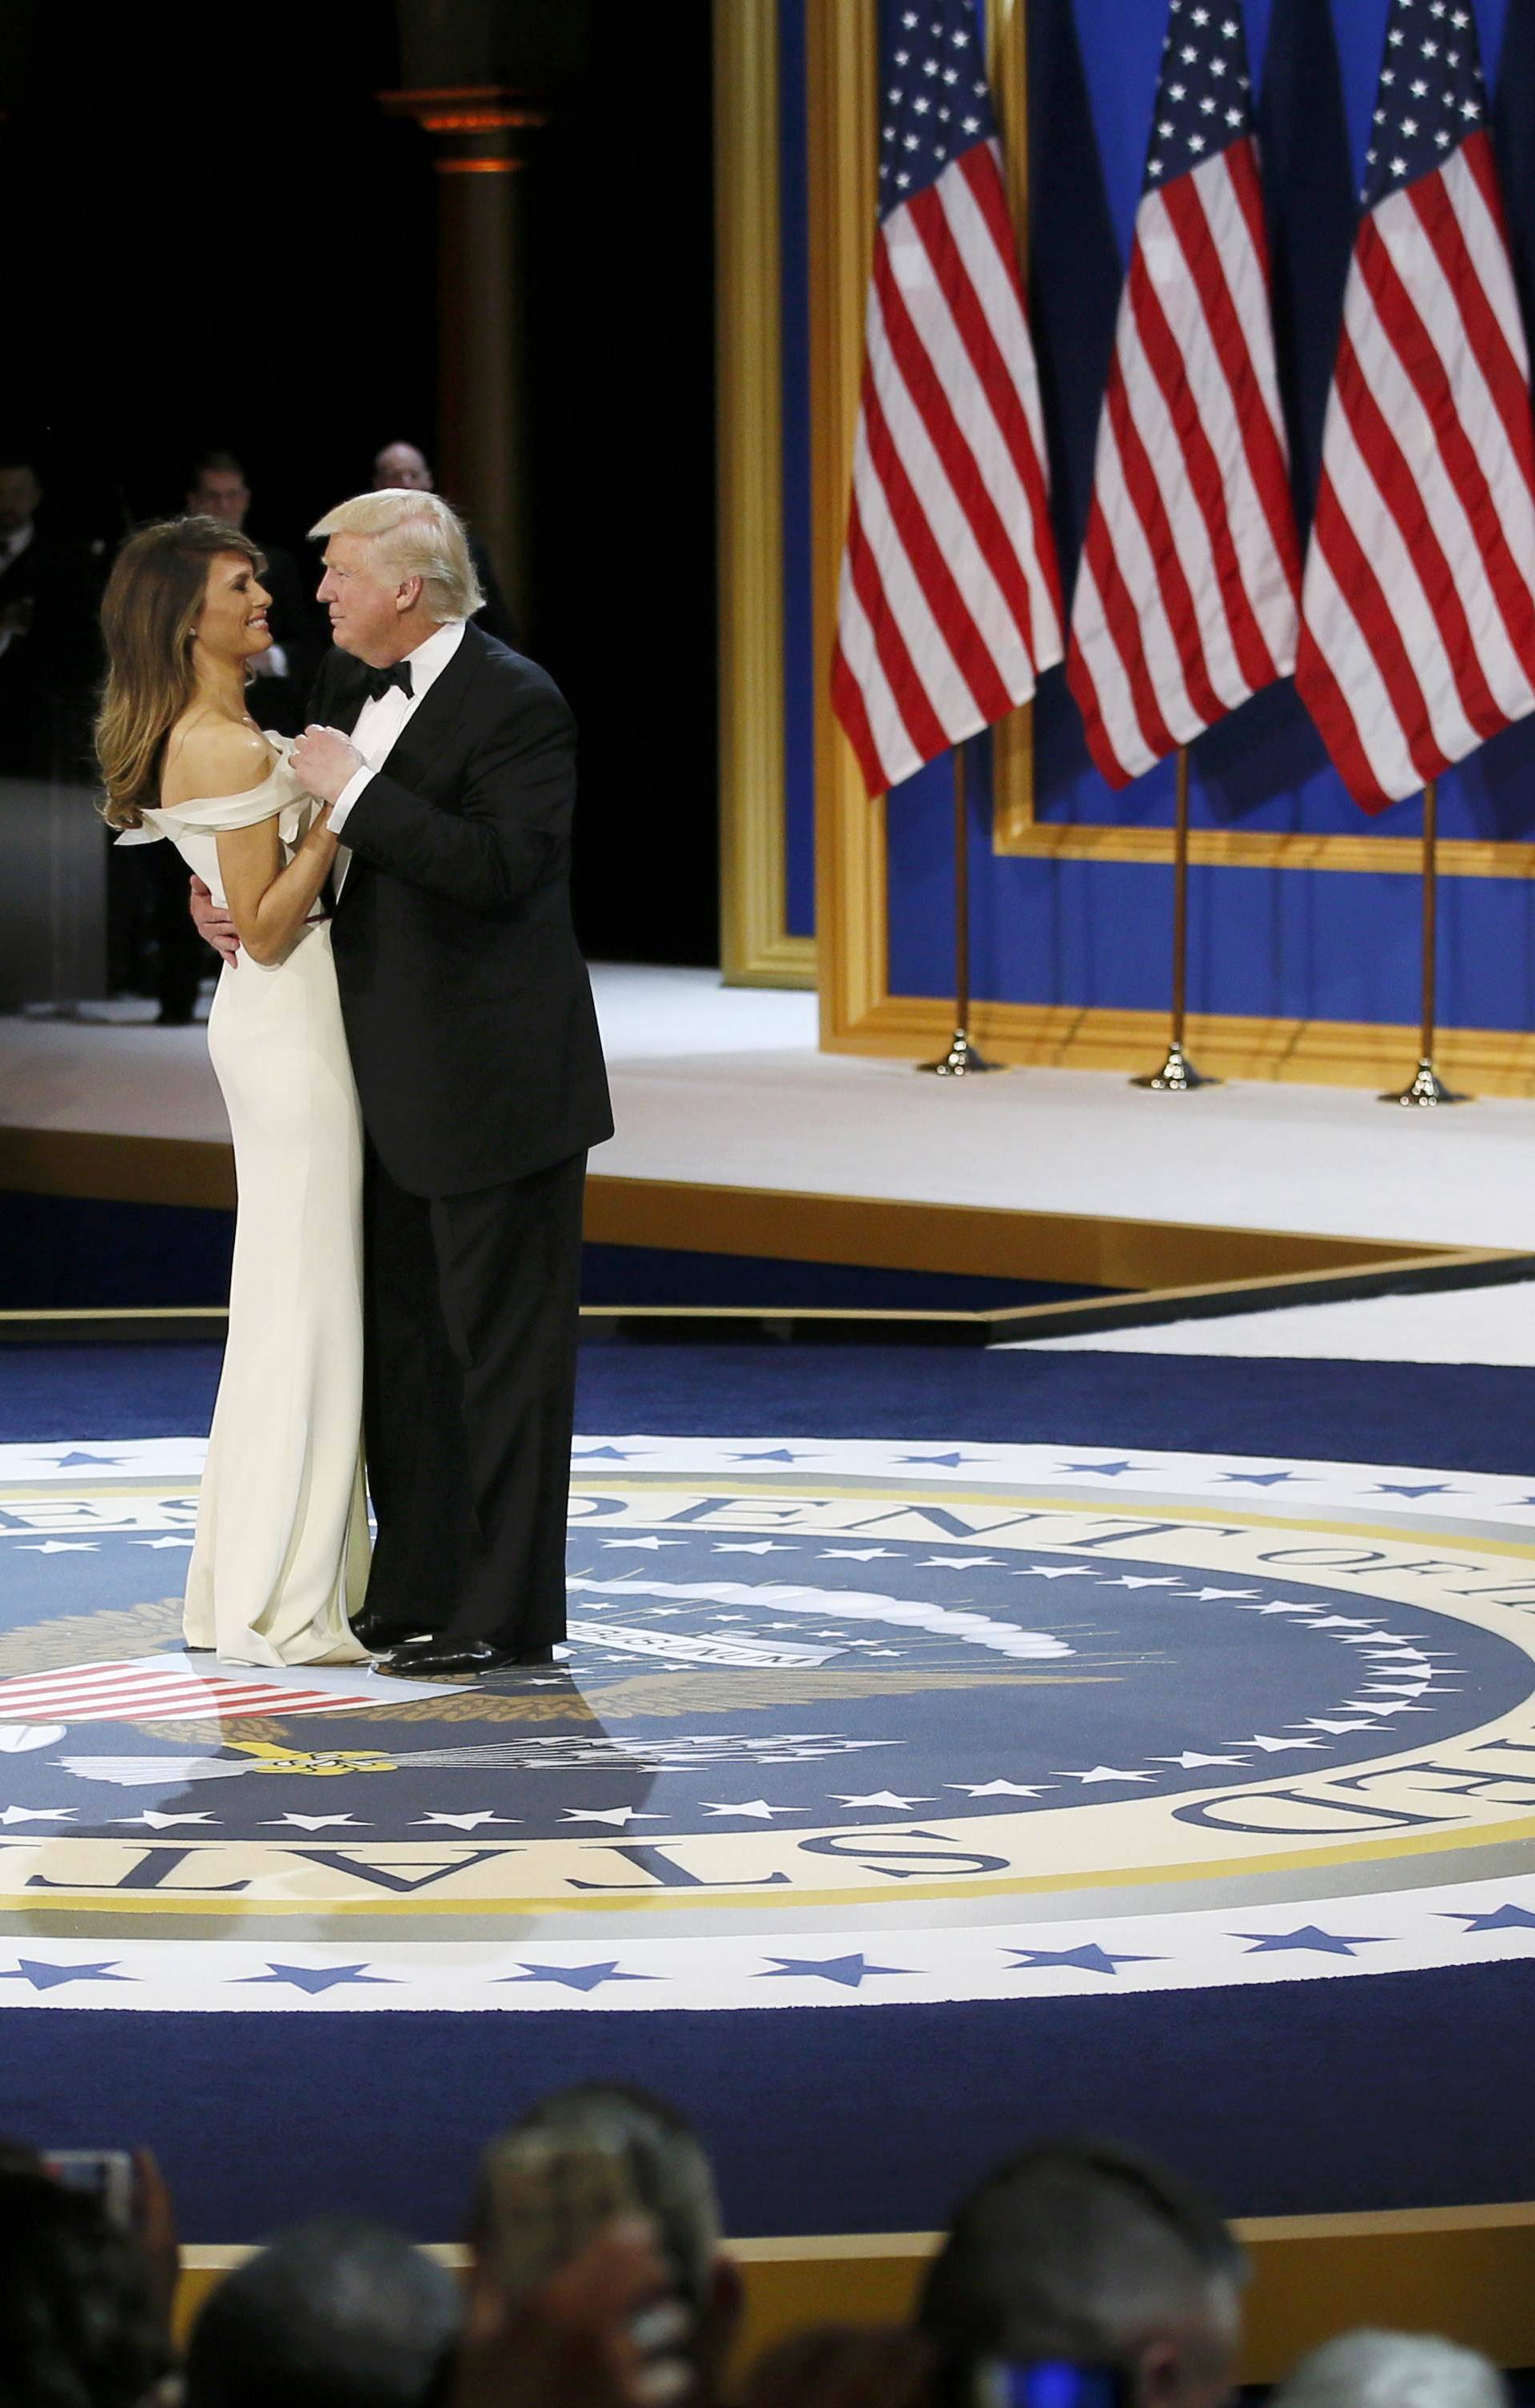 U.S. President Donald Trump and his wife first lady Melania Trump dance at the "Salute to Our Armed Forces" inaugural ball during inauguration festivites in Washington